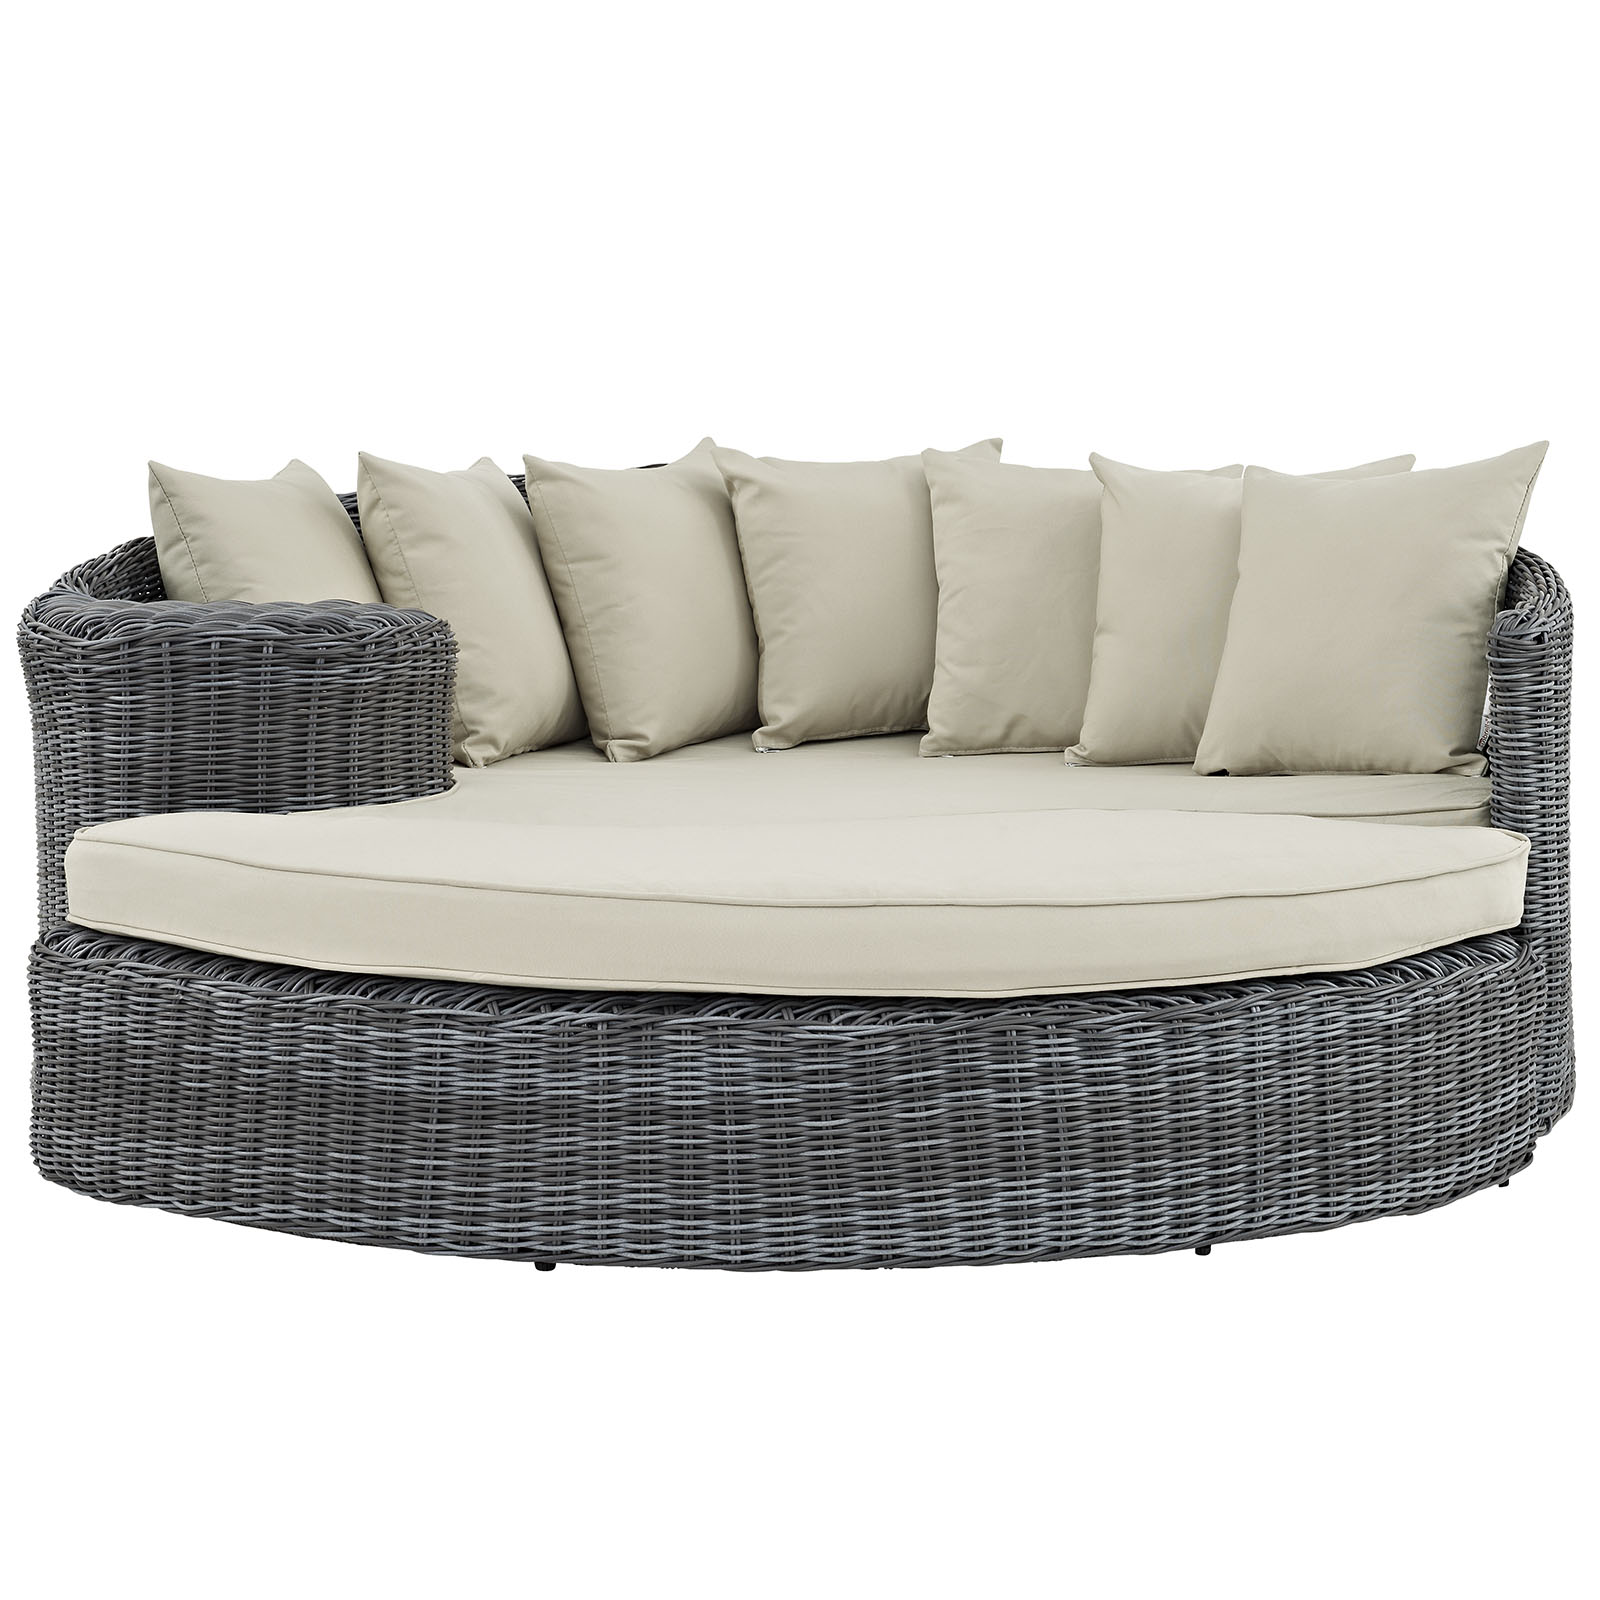 Modern Contemporary Urban Design Outdoor Patio Balcony Daybed Sofa, Beige, Rattan - image 3 of 4